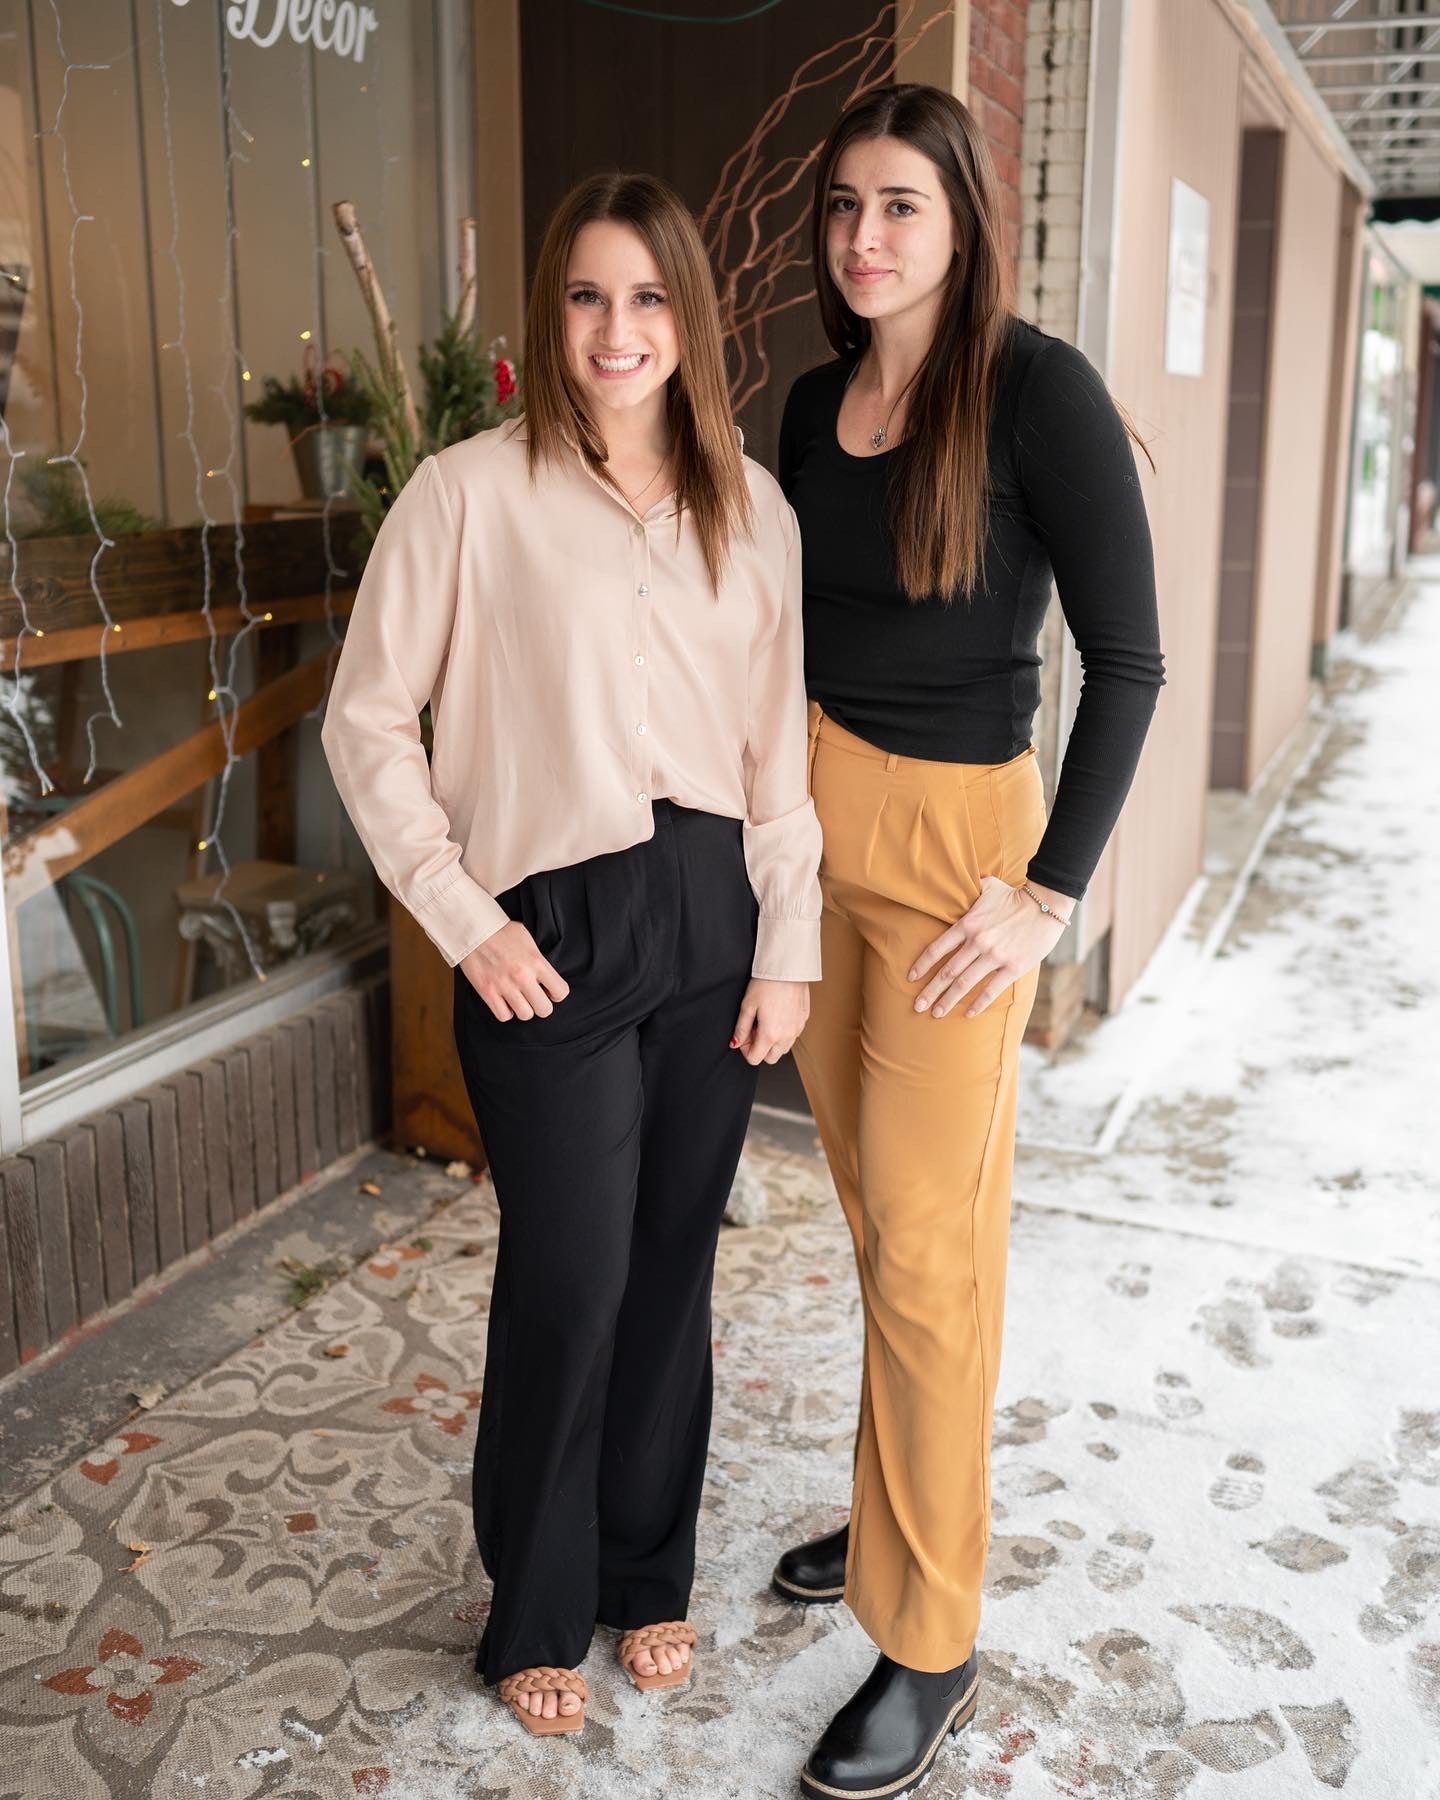 Lucy Twill Pant - Camel Brown – Karisma Boutique